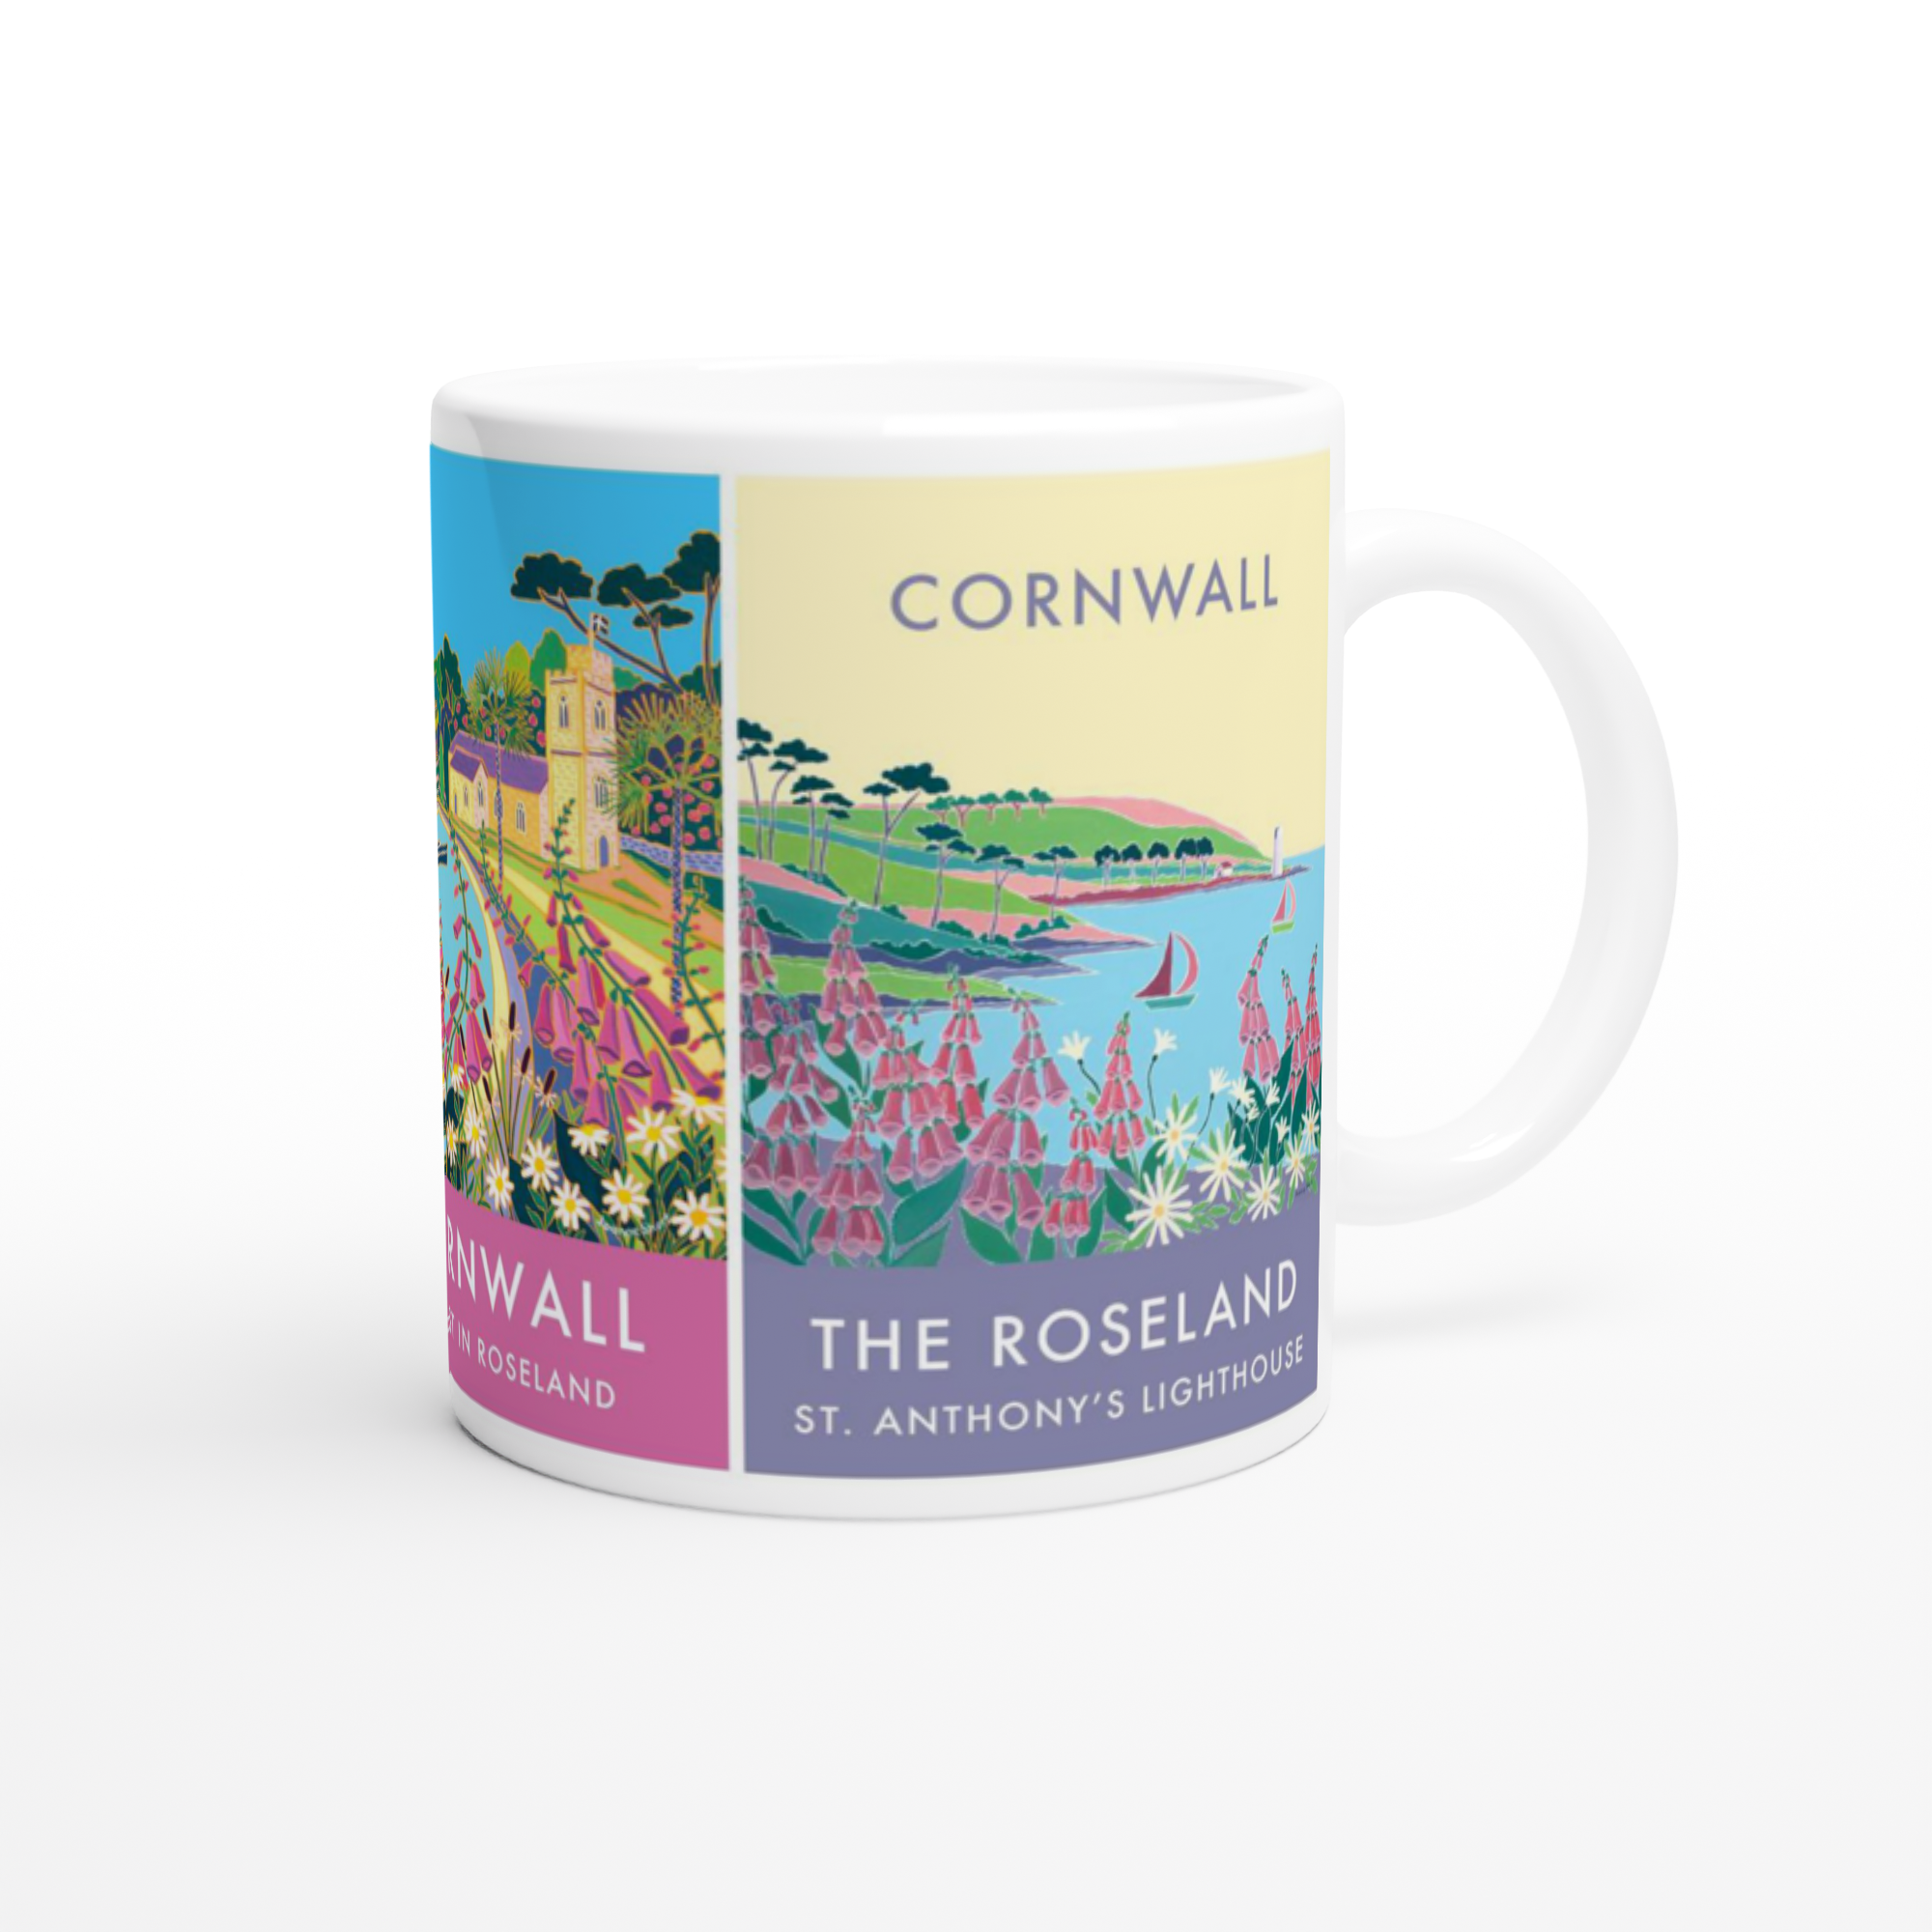 Cornish Art Mug featuring St Mawes, St Just in Roseland and St Anthony's Lighthouse by artist Joanne Short